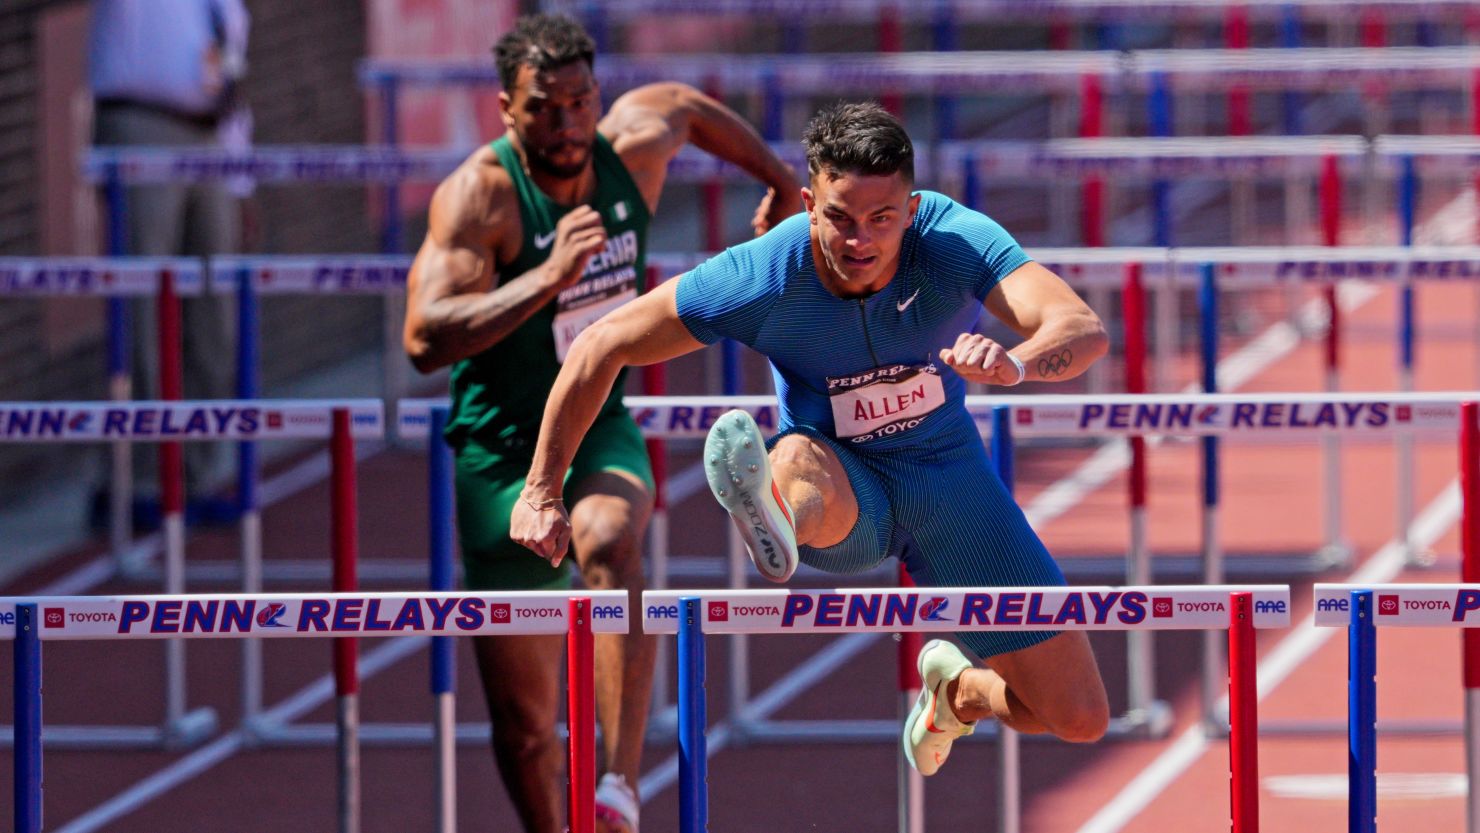 Devon Allen wins the men's 100 Hurdle elite race during the 126th running of the Penn Relays on April 30, 2022.